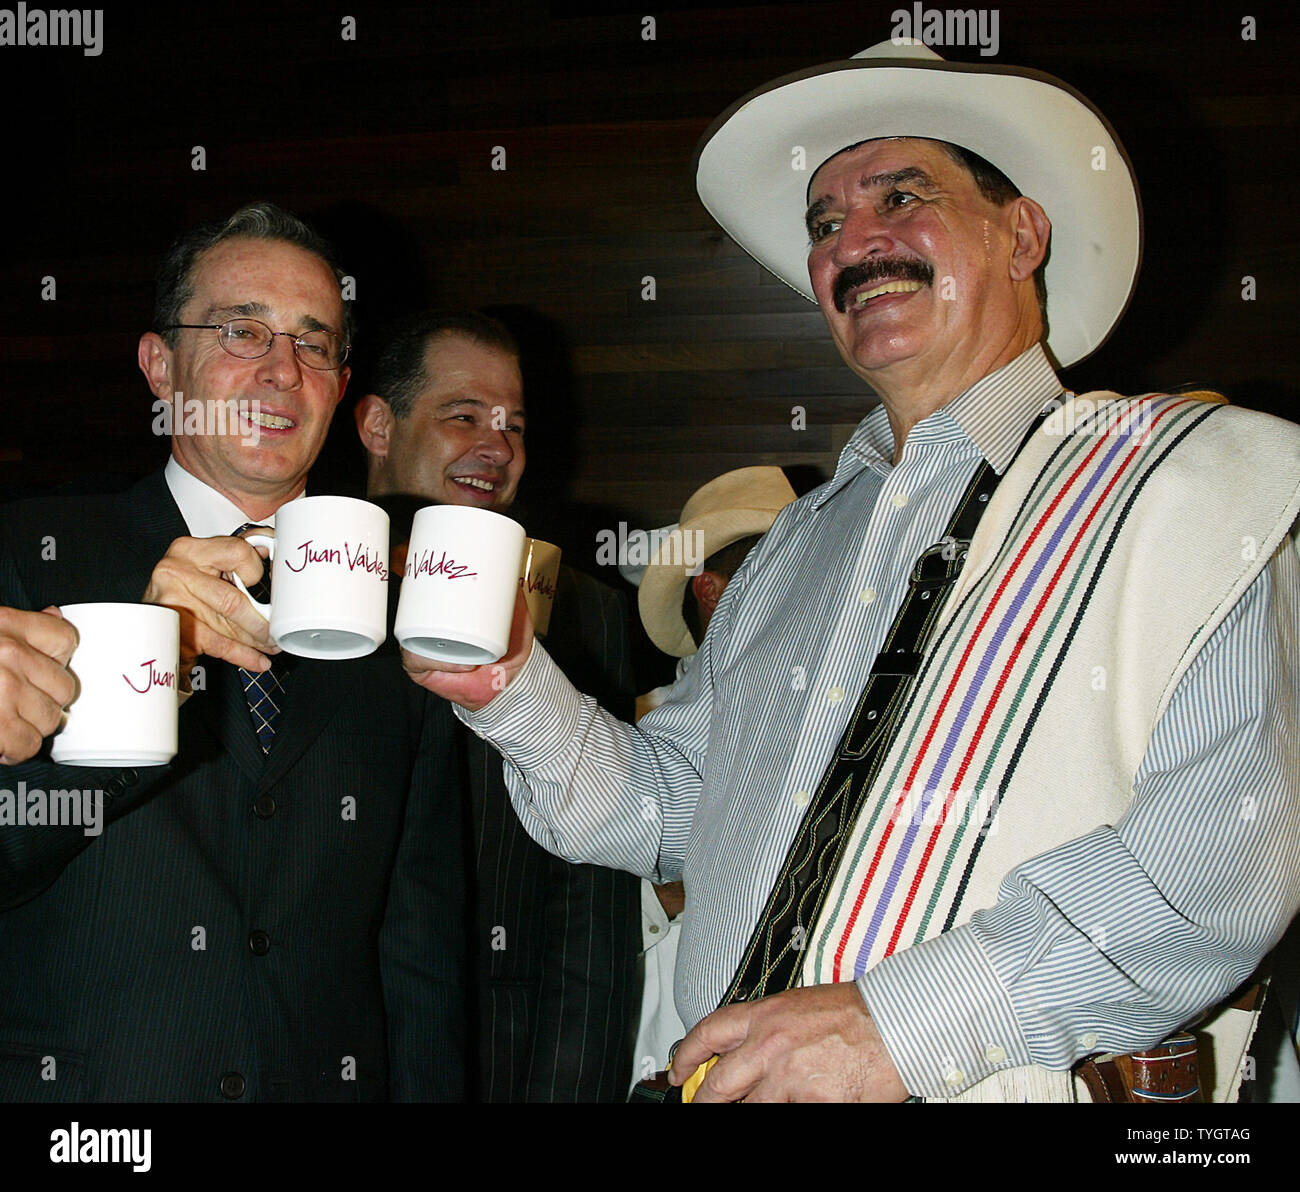 Colombian President Alvaro Uribe (L) and Juan Valdez, the icon of Colombian coffee, toast with coffee cups at the opening of the Juan Valdez Cafe in New York in New York on September 28, 2004.  (UPI Photo/Laura Cavanaugh) Stock Photo